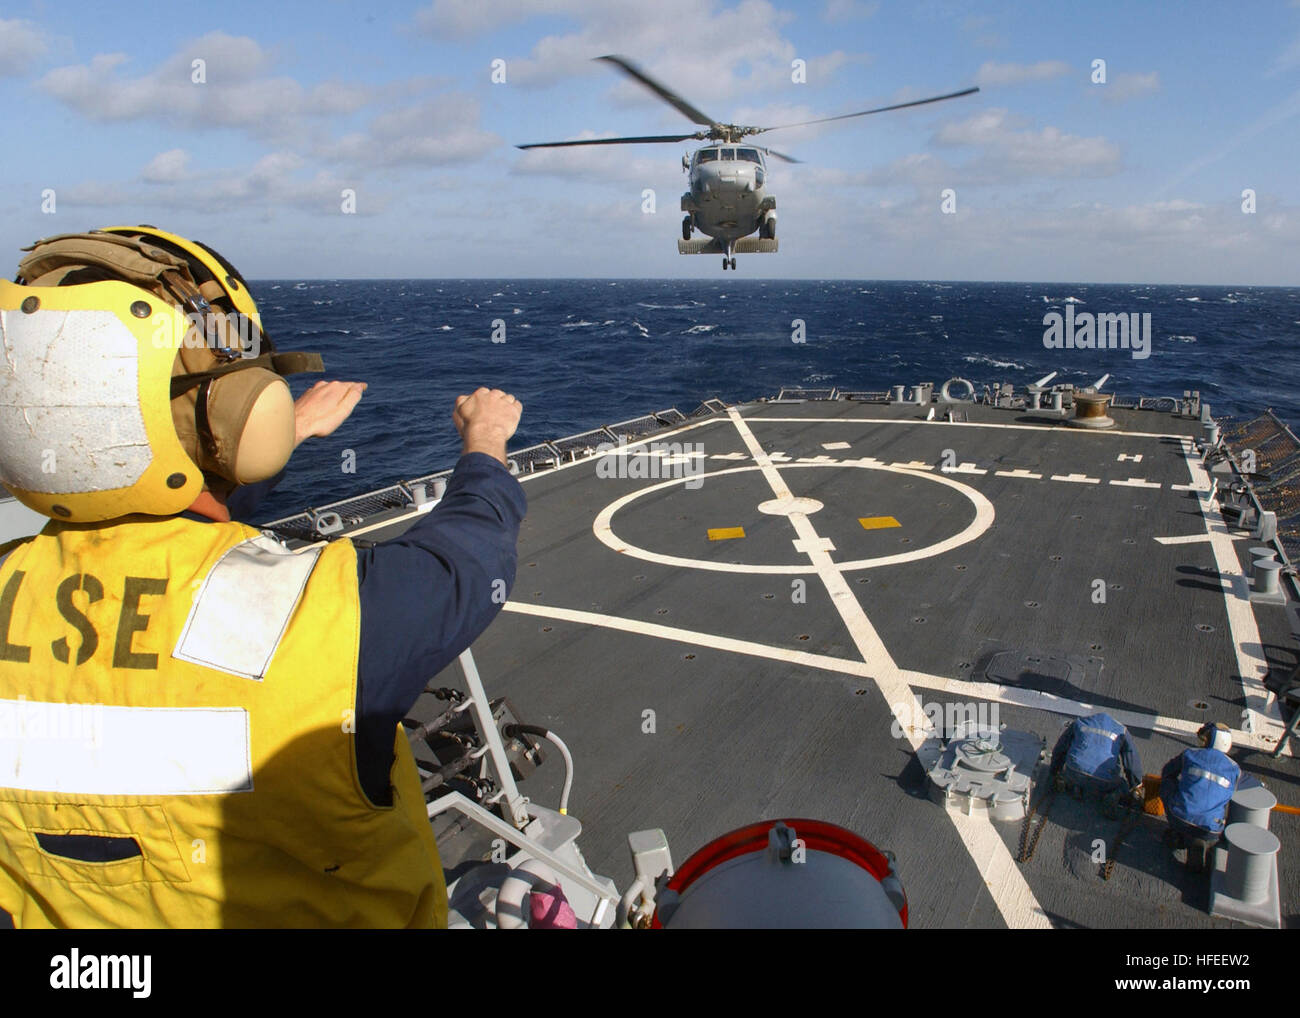 030113-N-3235P-503 At sea aboard USS Donald Cook (DDG 75) Jan. 13, 2003 -- BoatswainÕs Mate 3rd Class Randal S. Davis directs an SH-60 ÒSea HawkÓ helicopter onto the shipÕs flight deck.  The Donald Cook is currently on a regularly scheduled six-month deployment conducting missions in support of Operation Enduring Freedom.  U.S. Navy photo by Photographer's Mate 1st Class Michael W. Pendergrass.  (RELEASED) US Navy 030113-N-3235P-503 Boatswain%%5Ersquo,s Mate 3rd Class Randal S. Davis directs an SH-60 Stock Photo